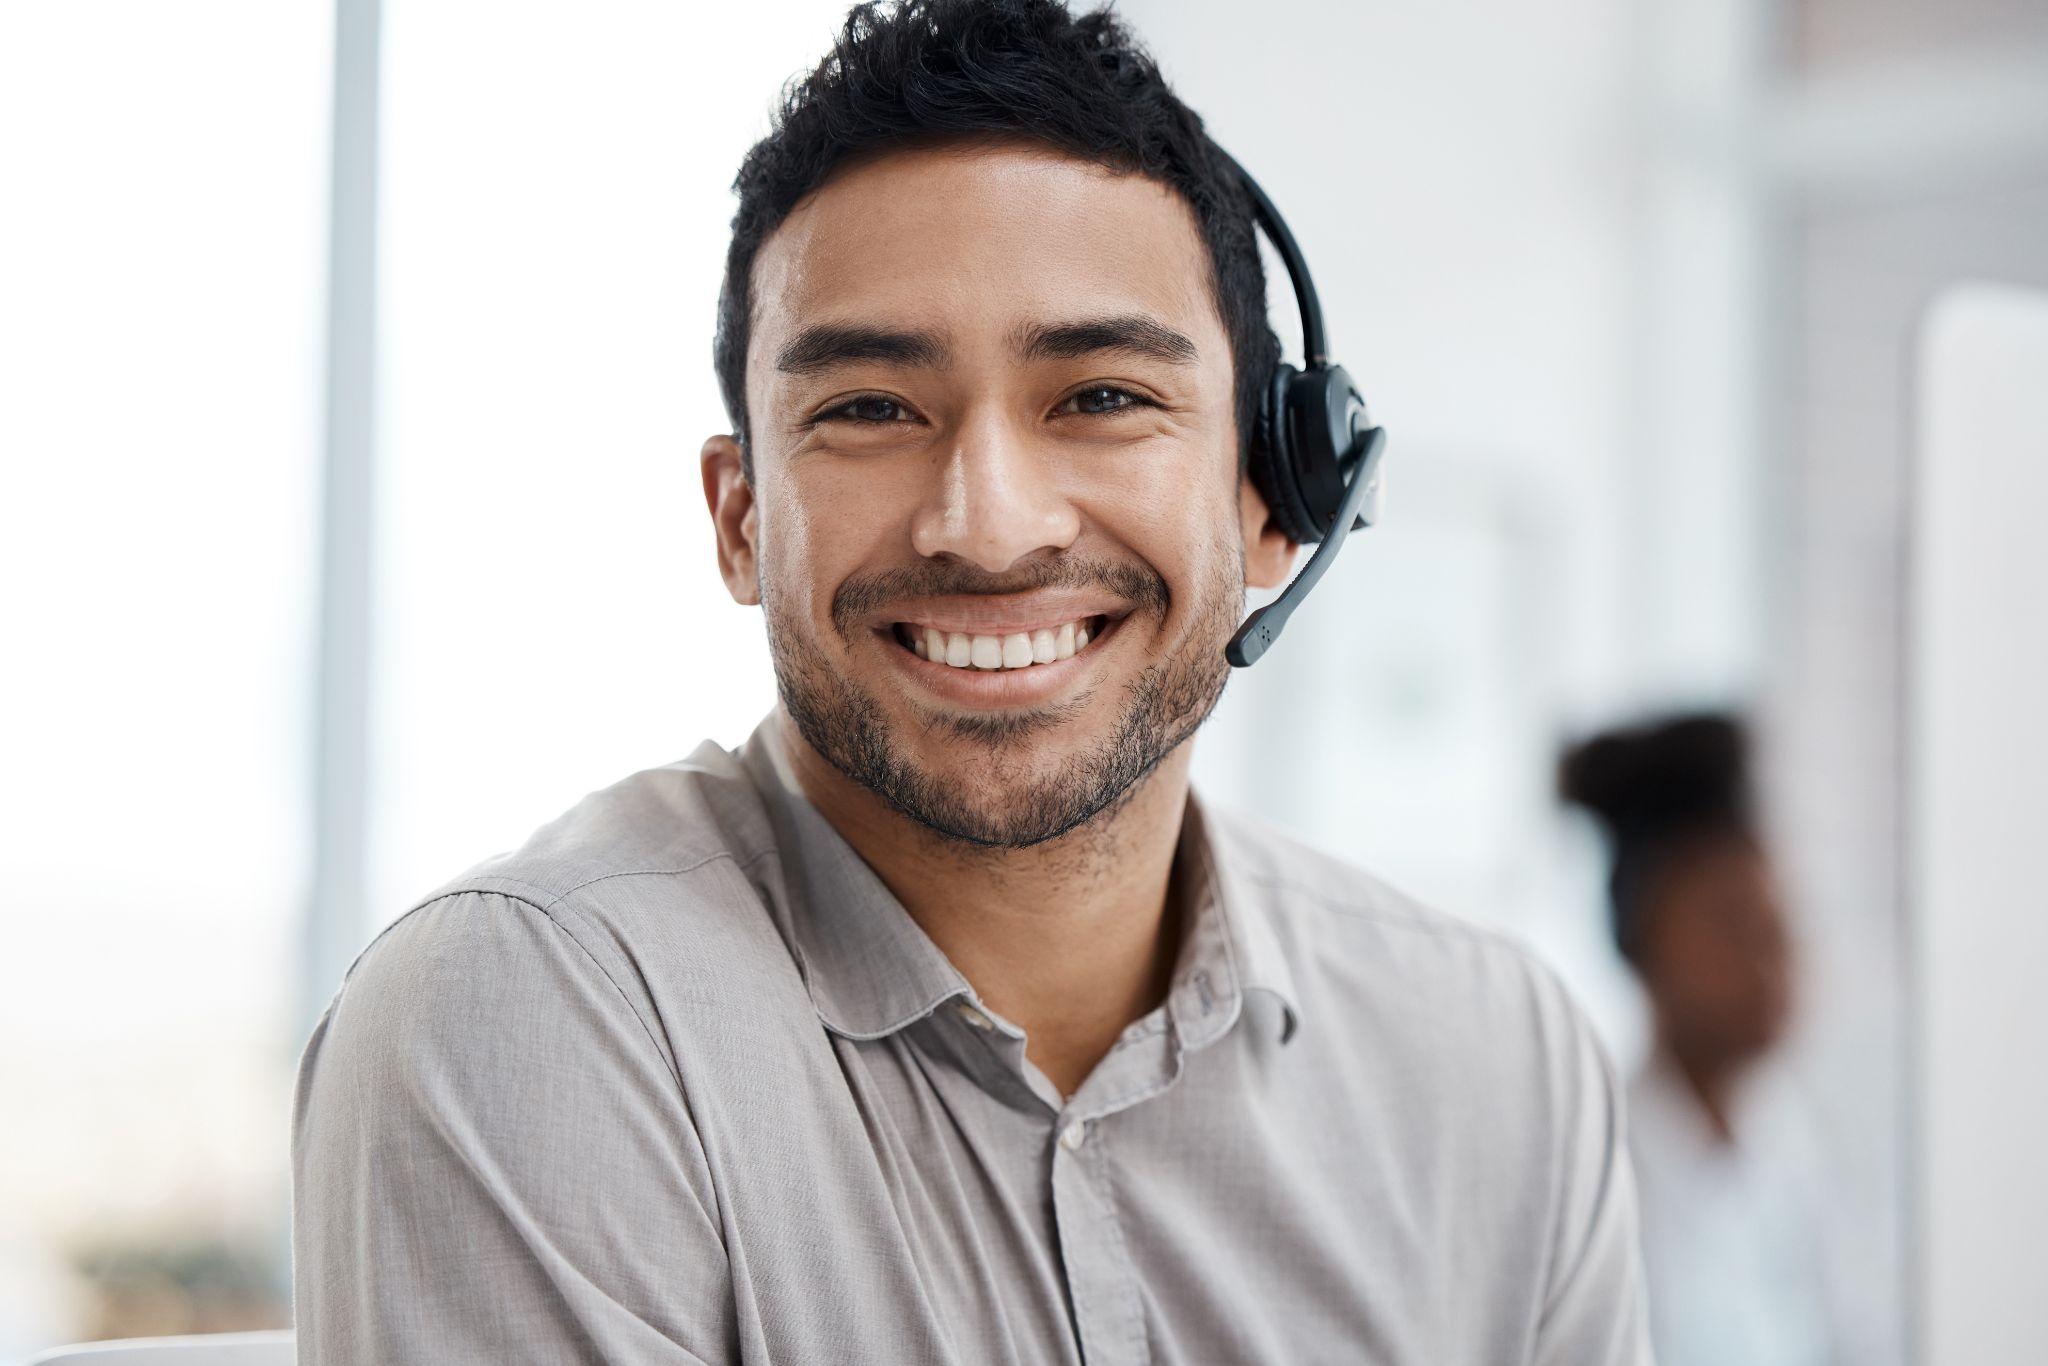 Male customer service agent with headset.